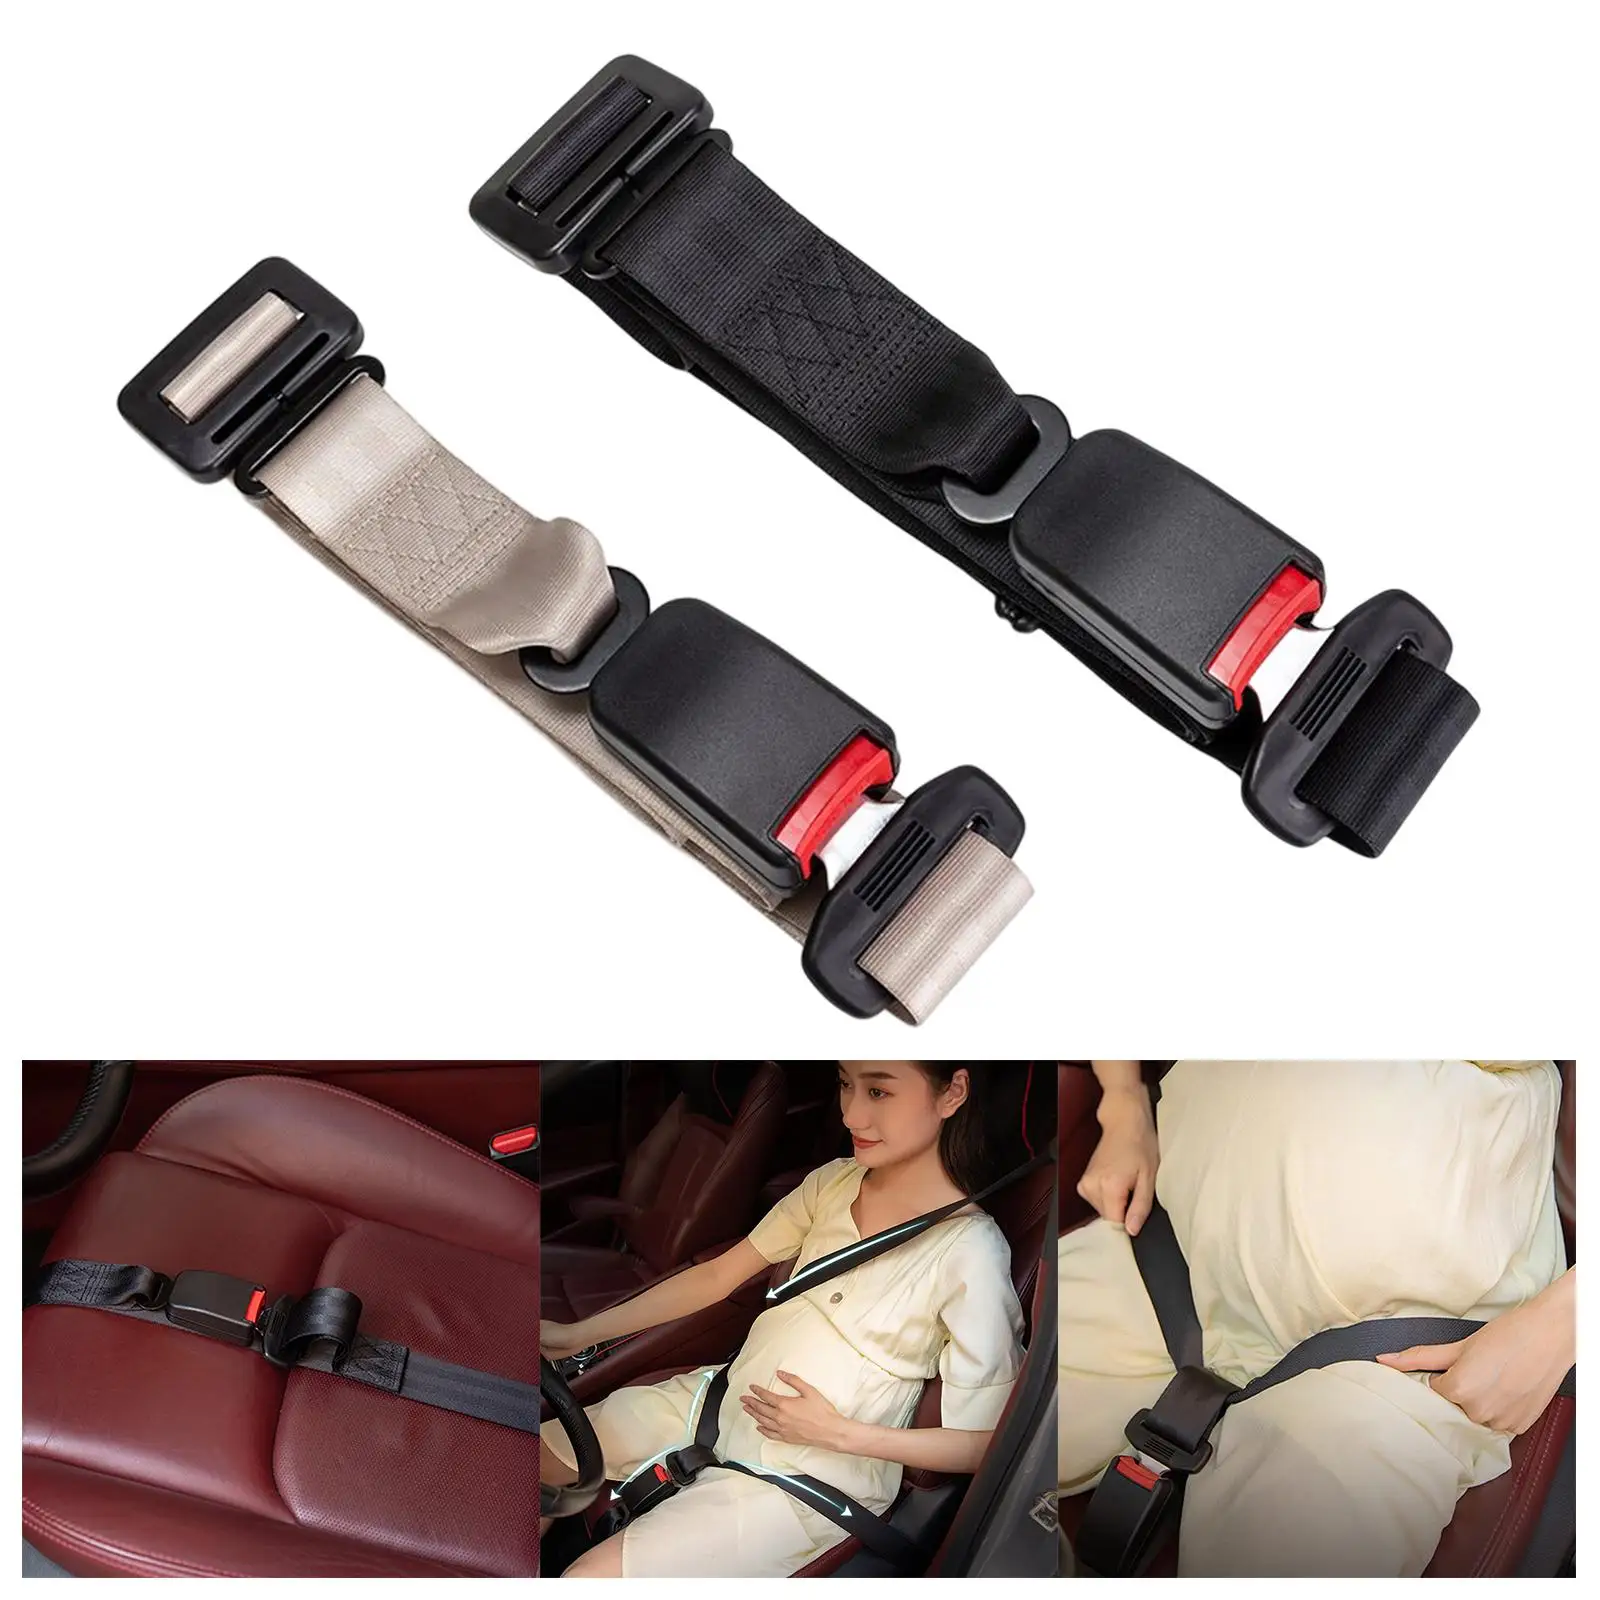 Seat Safety Belt Protect Unborn Baby Adjuster for Woman